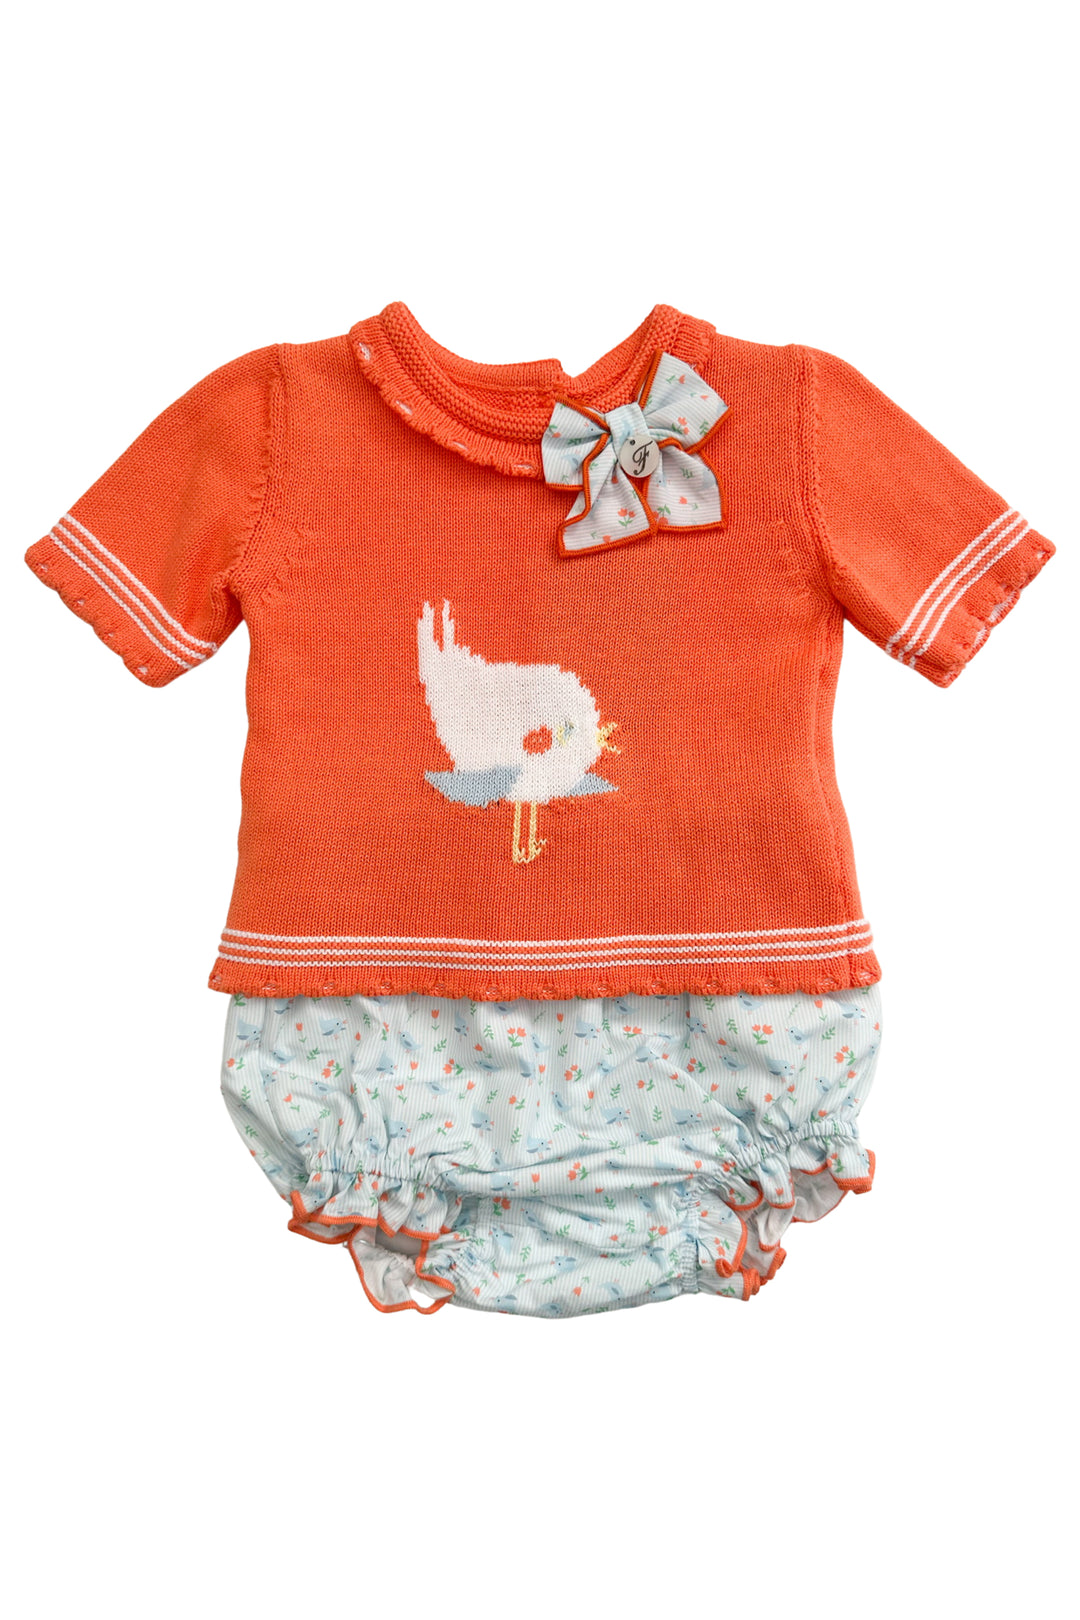 Foque PREORDER "Hallie" Coral Knit Top & Bird Print Bloomers | Millie and John